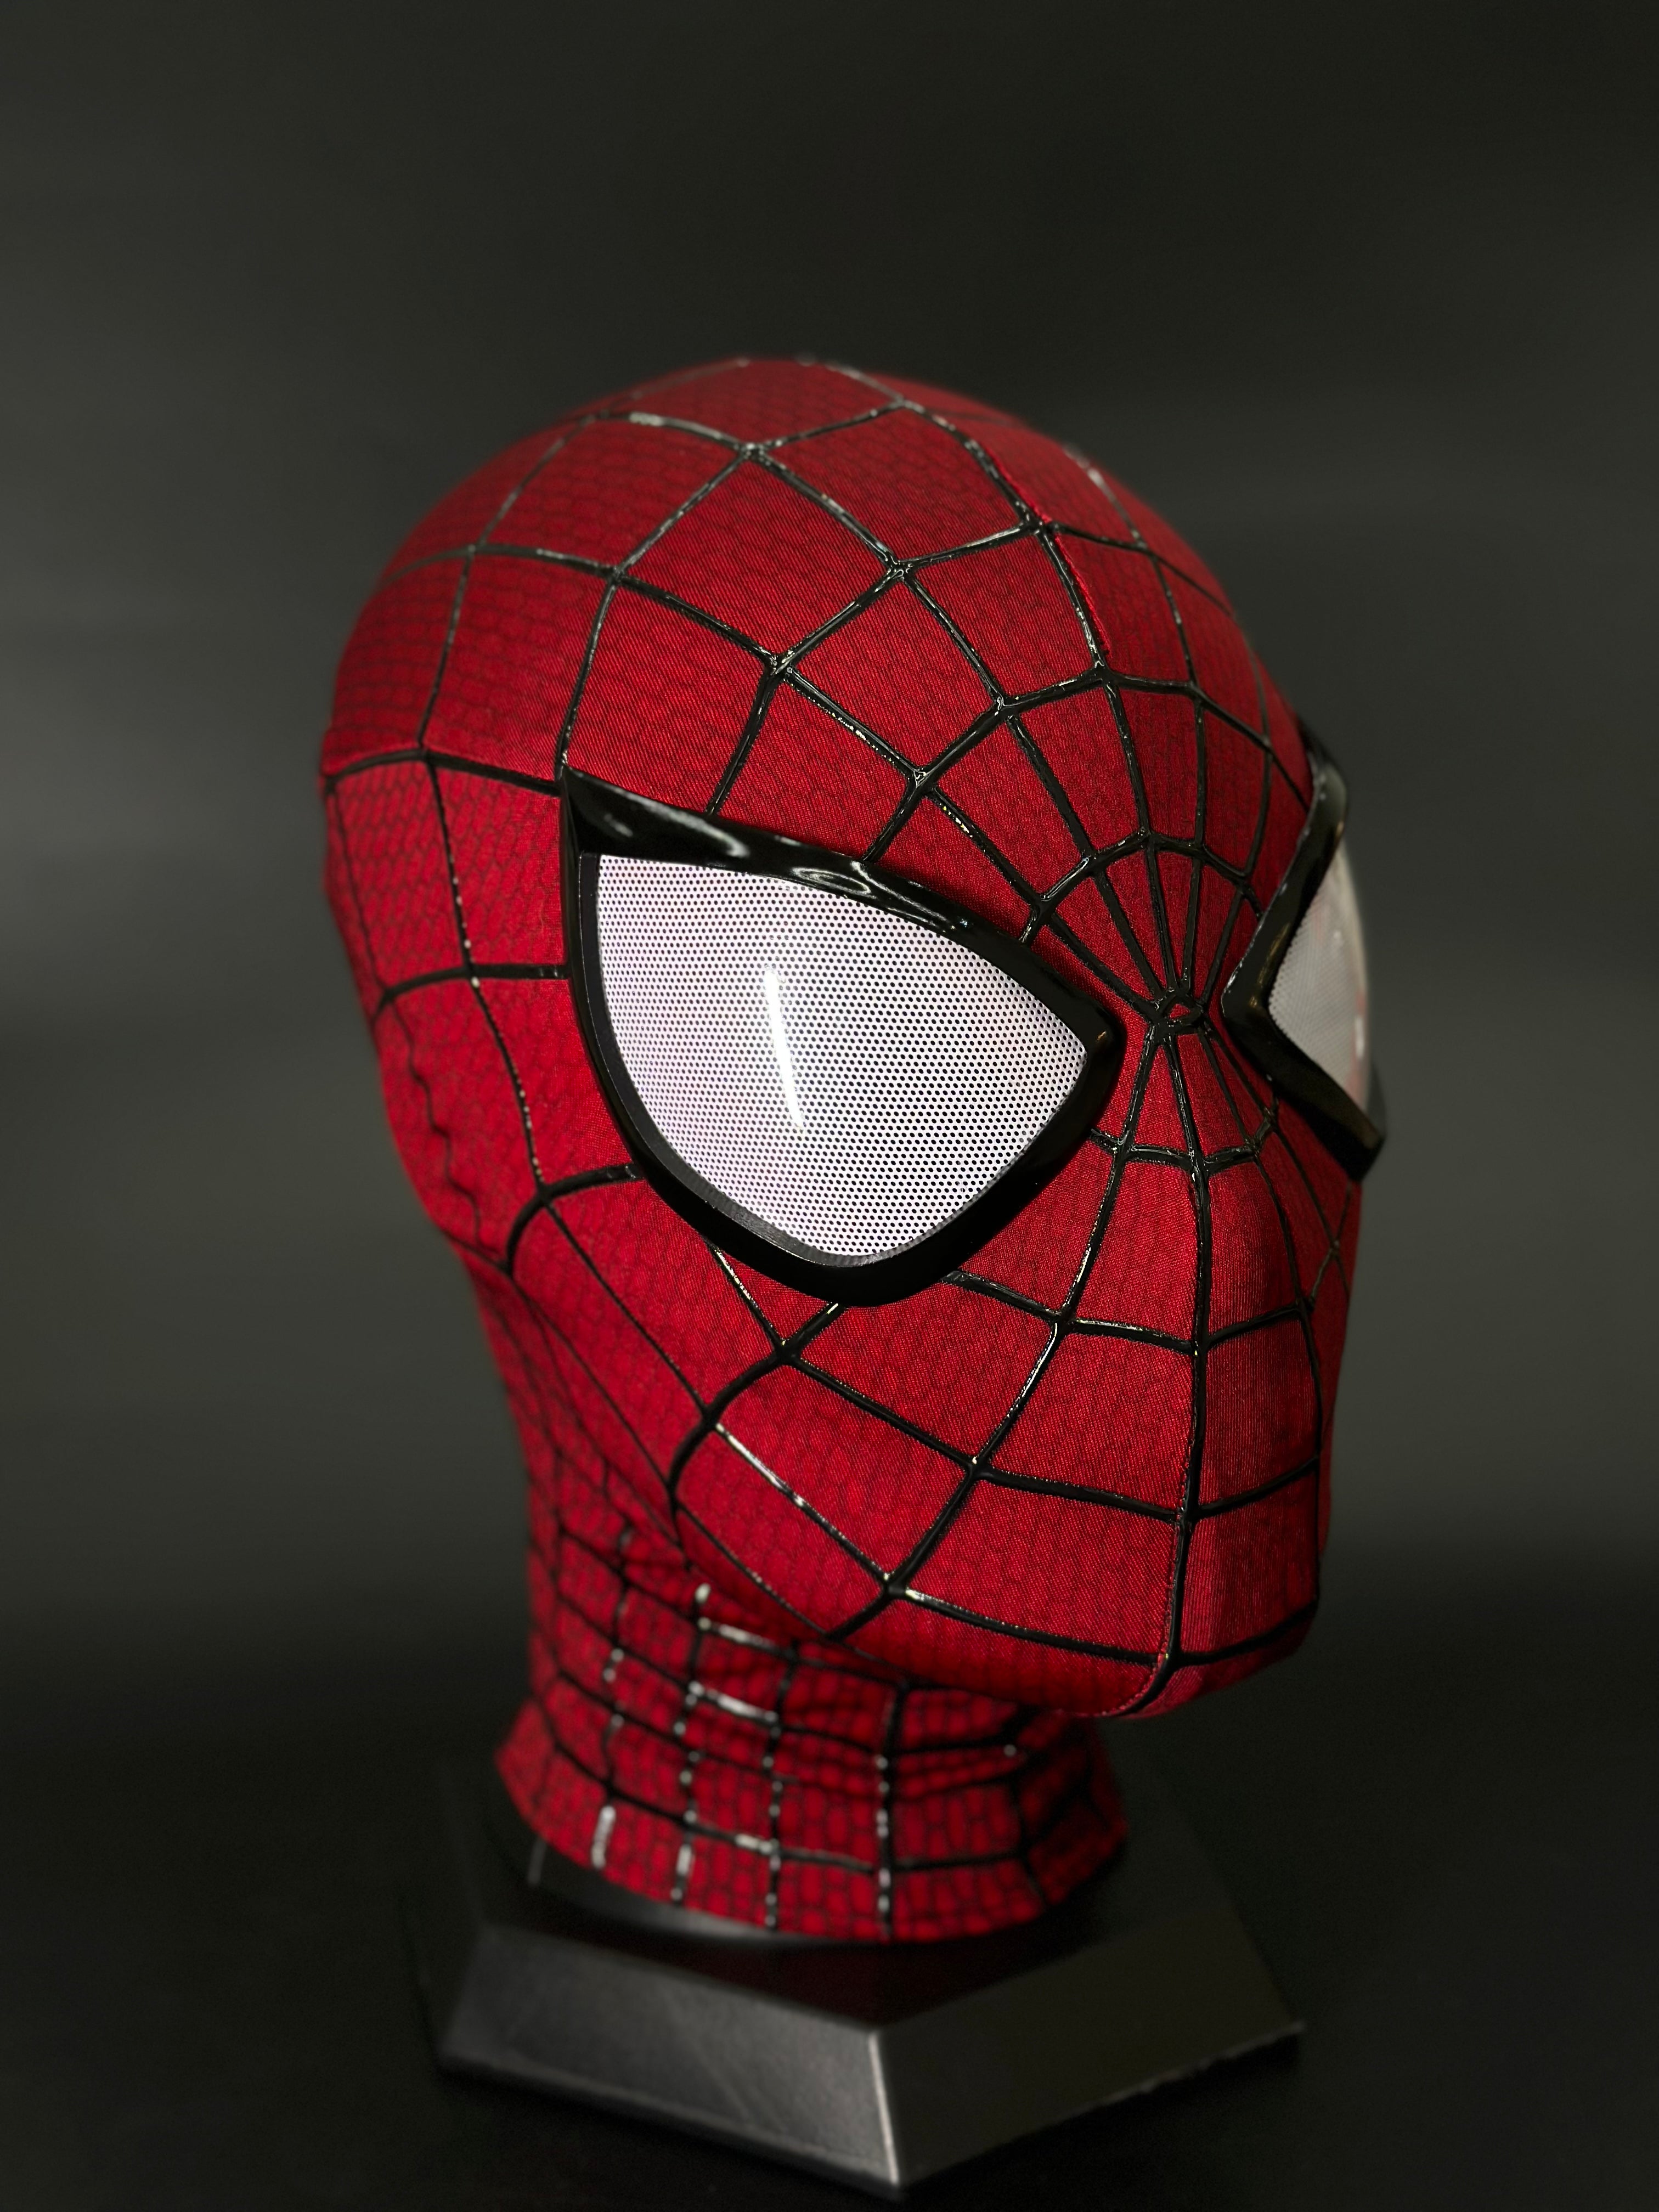 V3 TASM 2 mask (Andrew) with Faceshell and Lenses Wearable Movie Prop Replica (Adult)